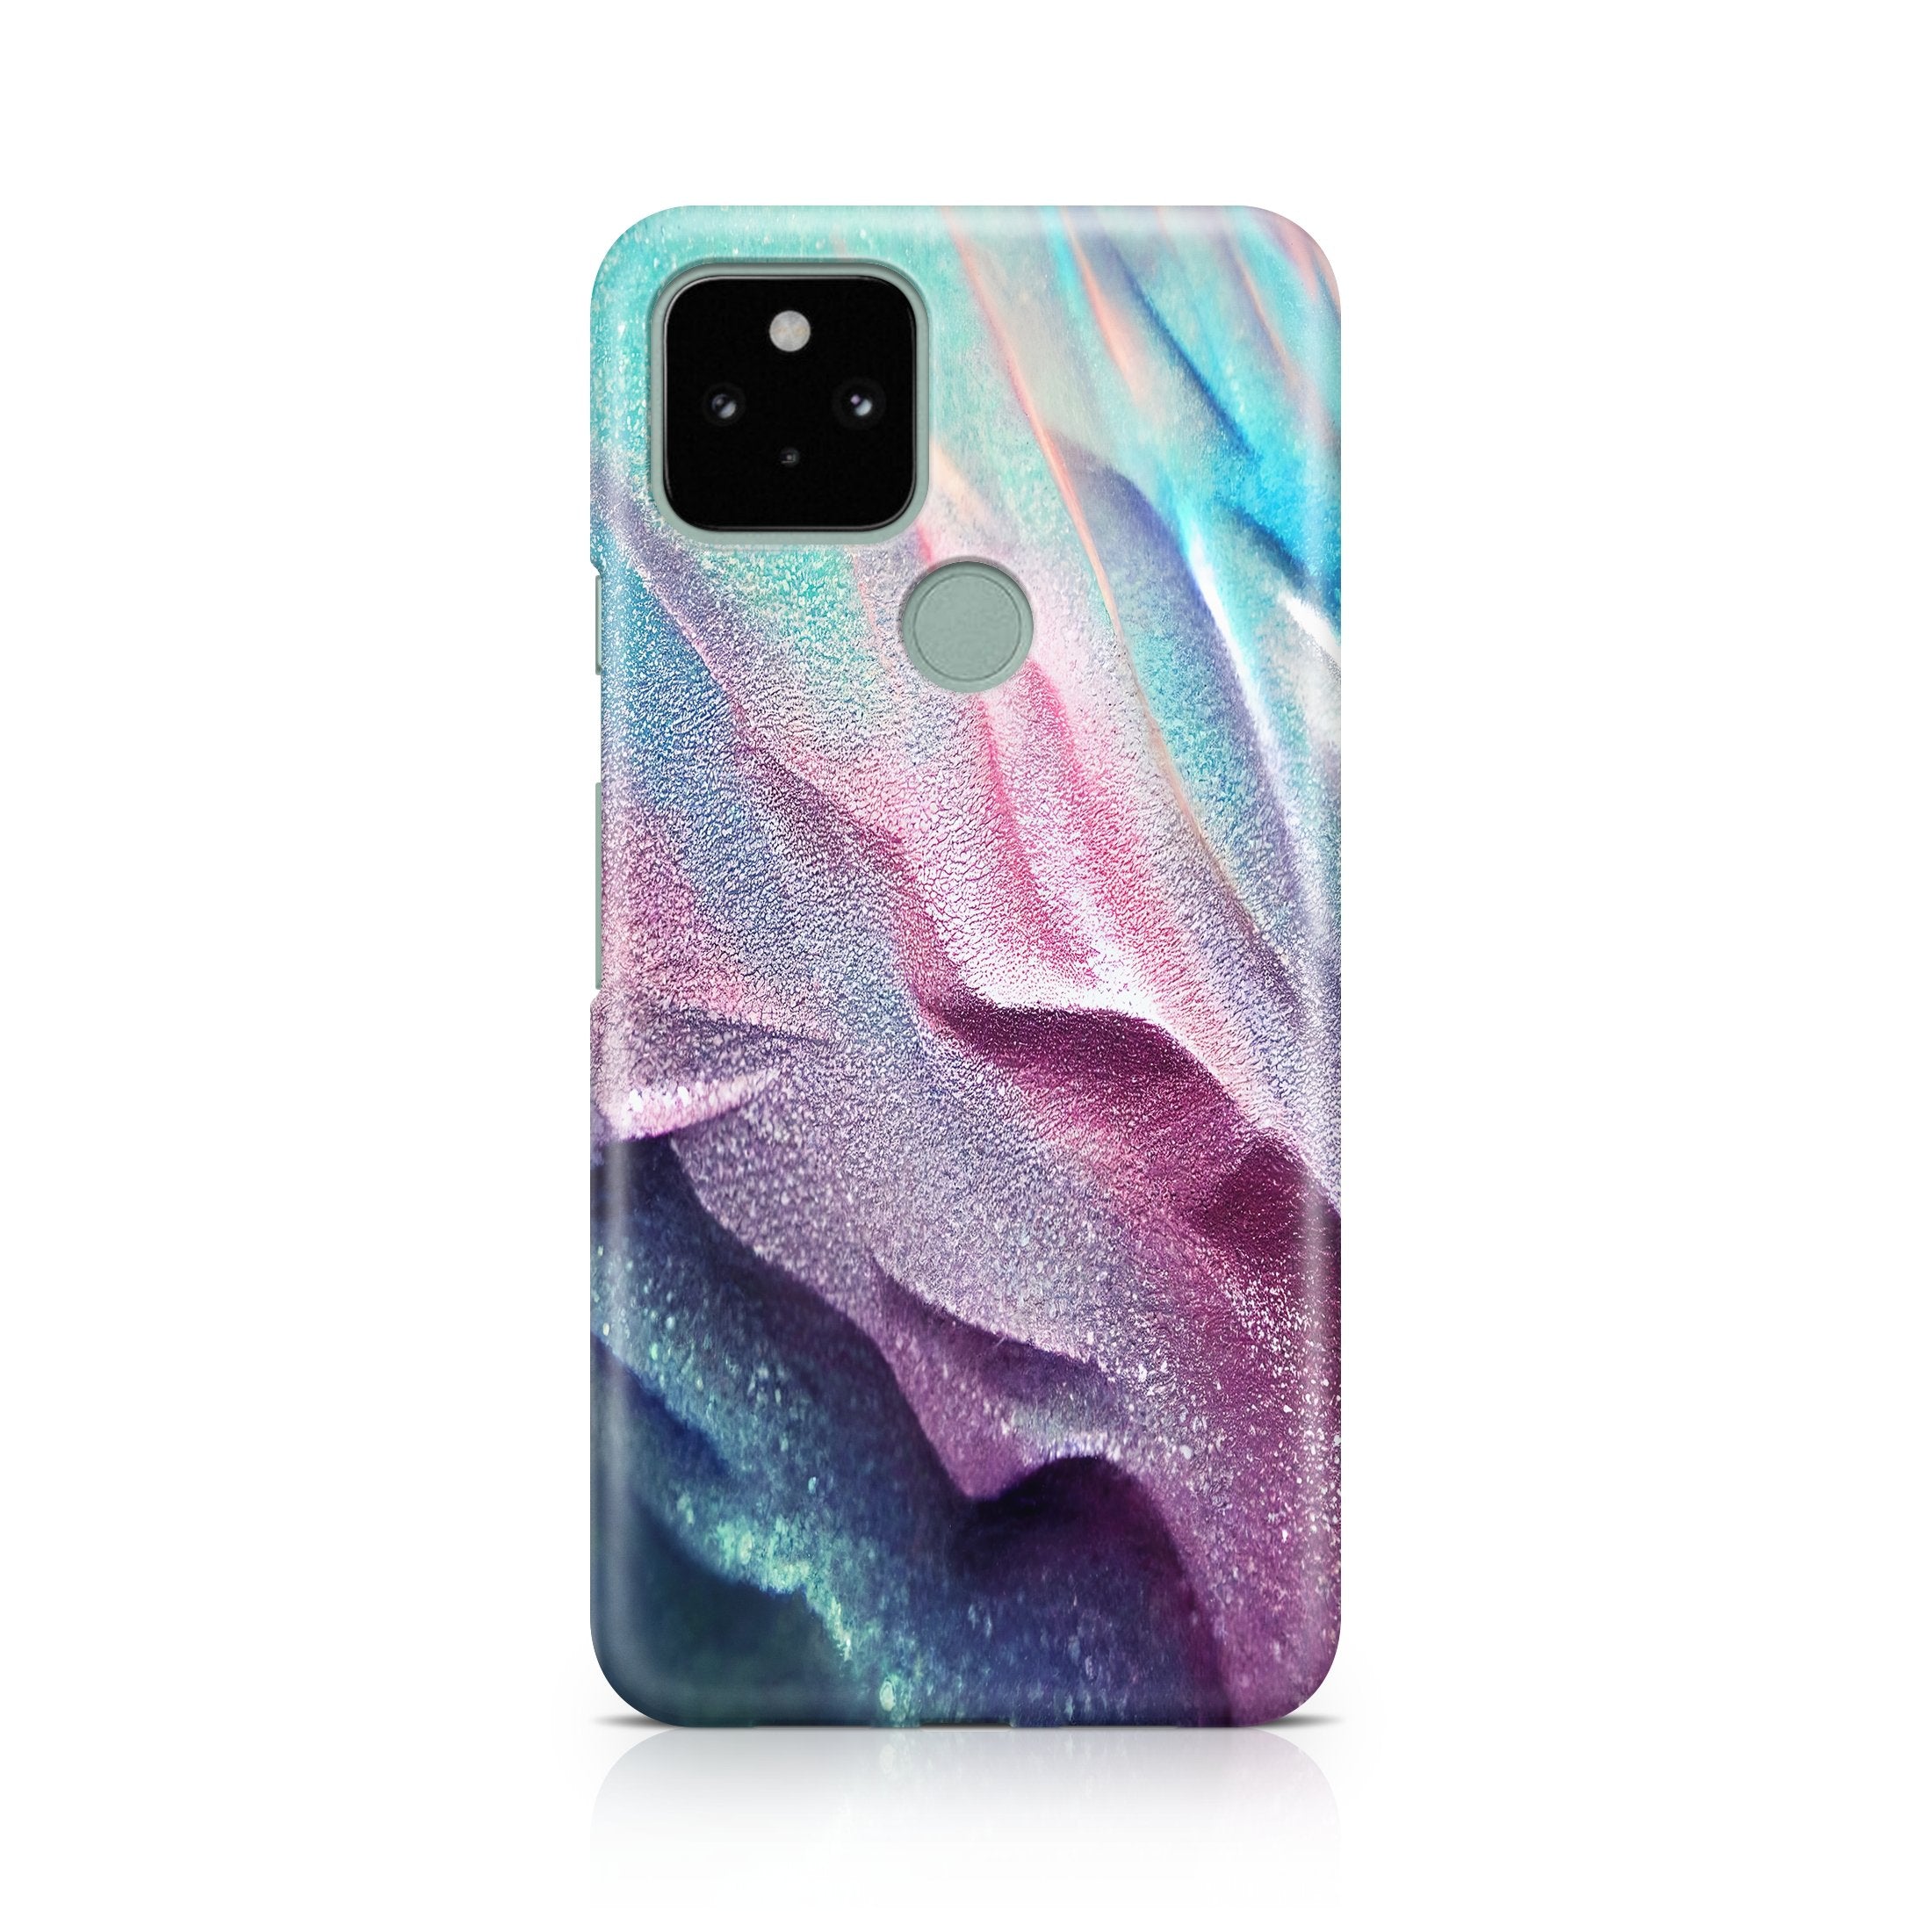 Butterfly Sands - Google phone case designs by CaseSwagger